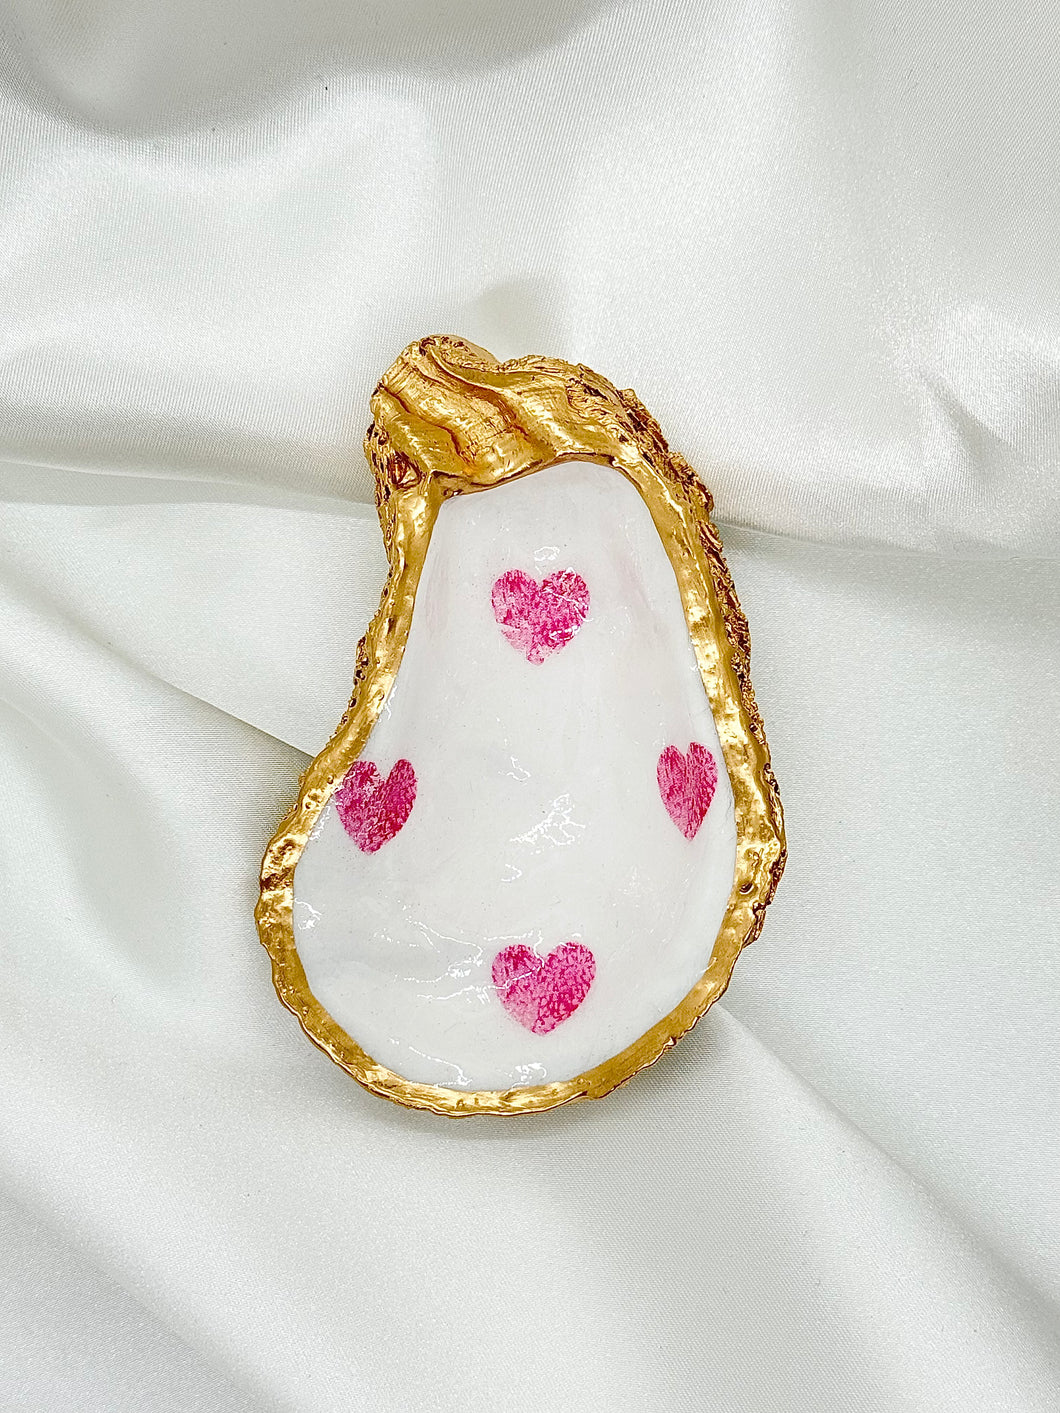 Stamped Hearts Oyster Trinket Dish